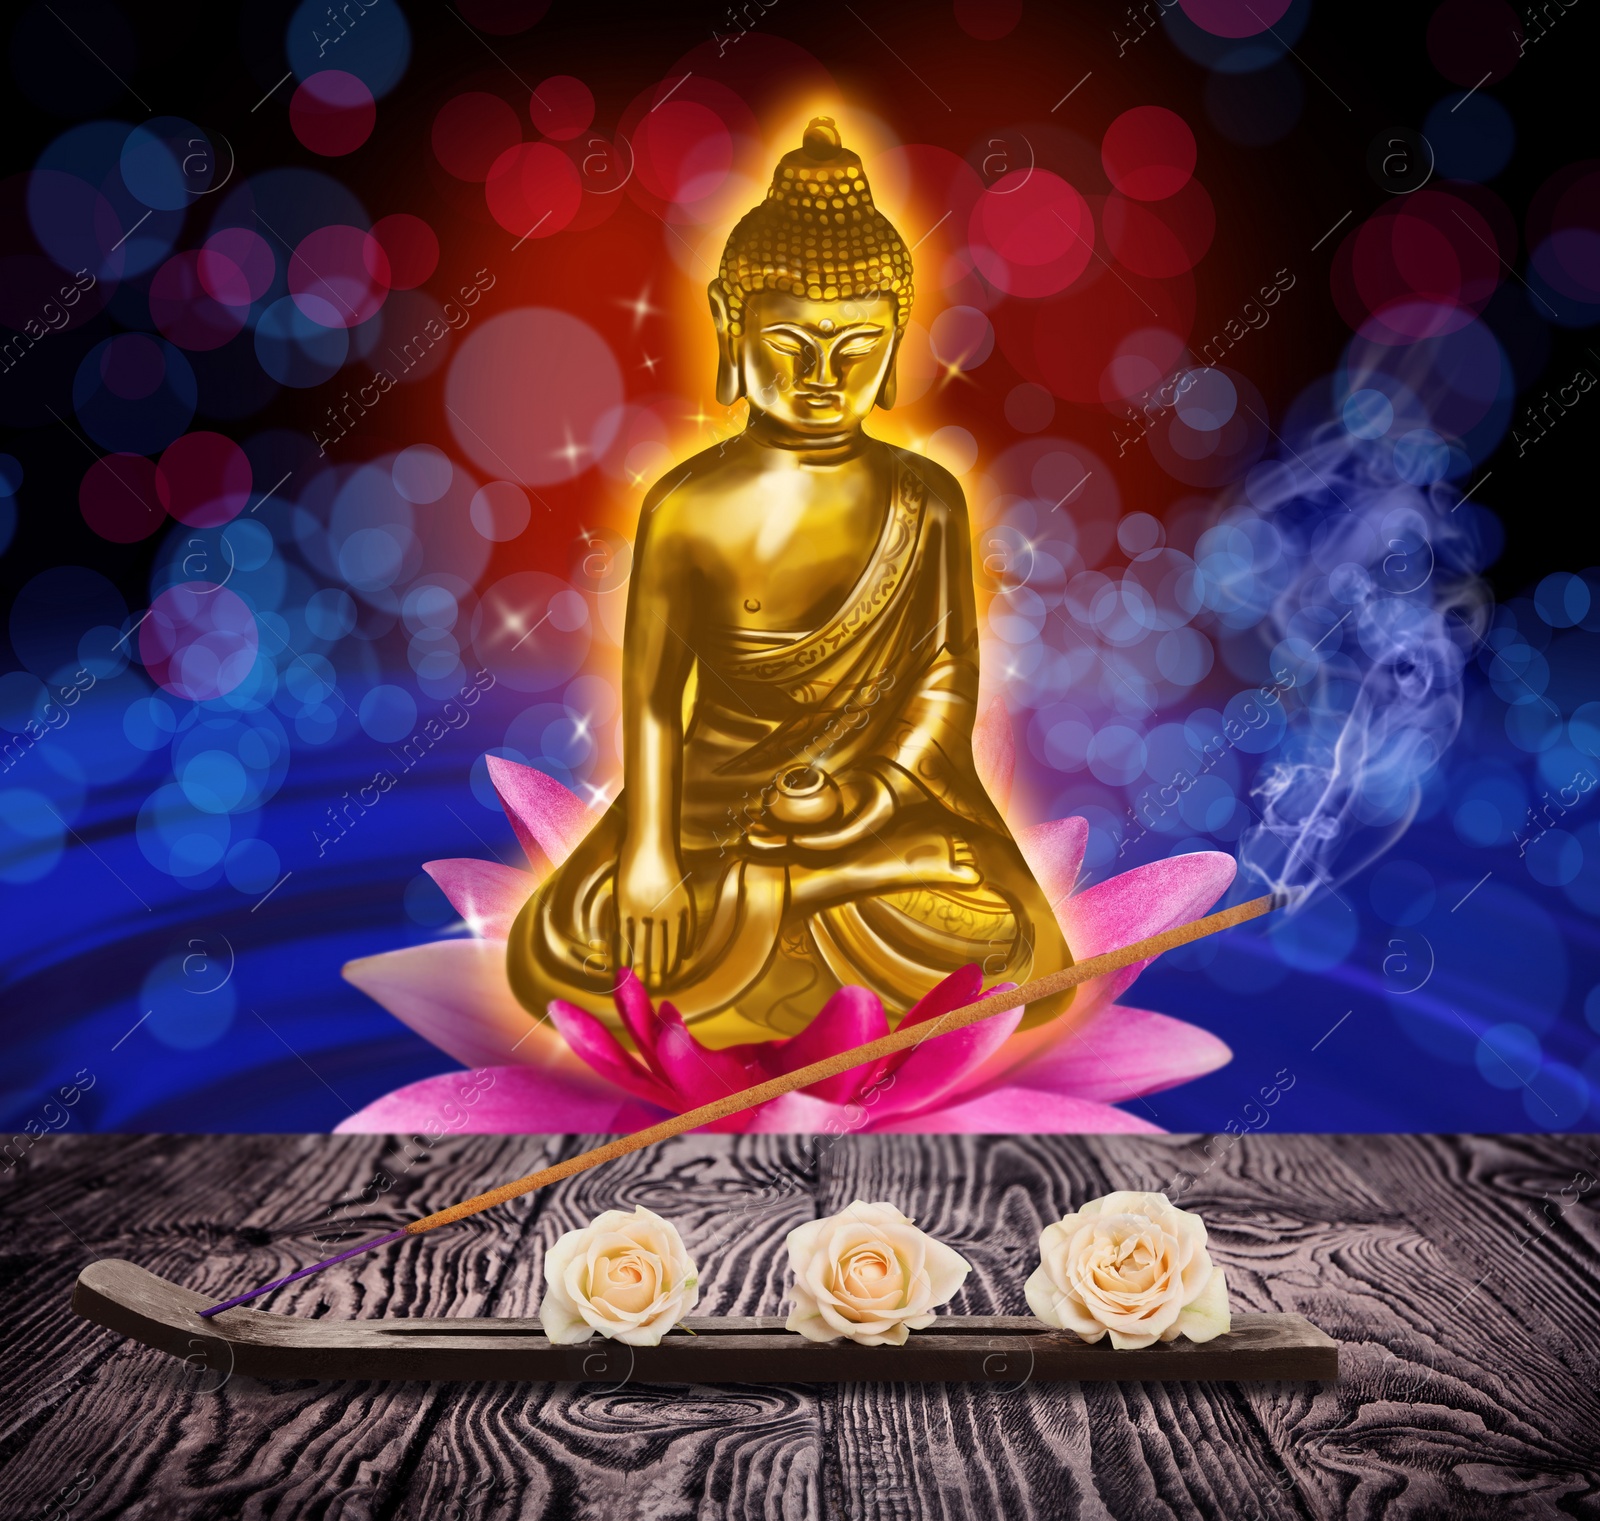 Image of Composition with smoldering incense stick on wooden table and Buddha figure on background